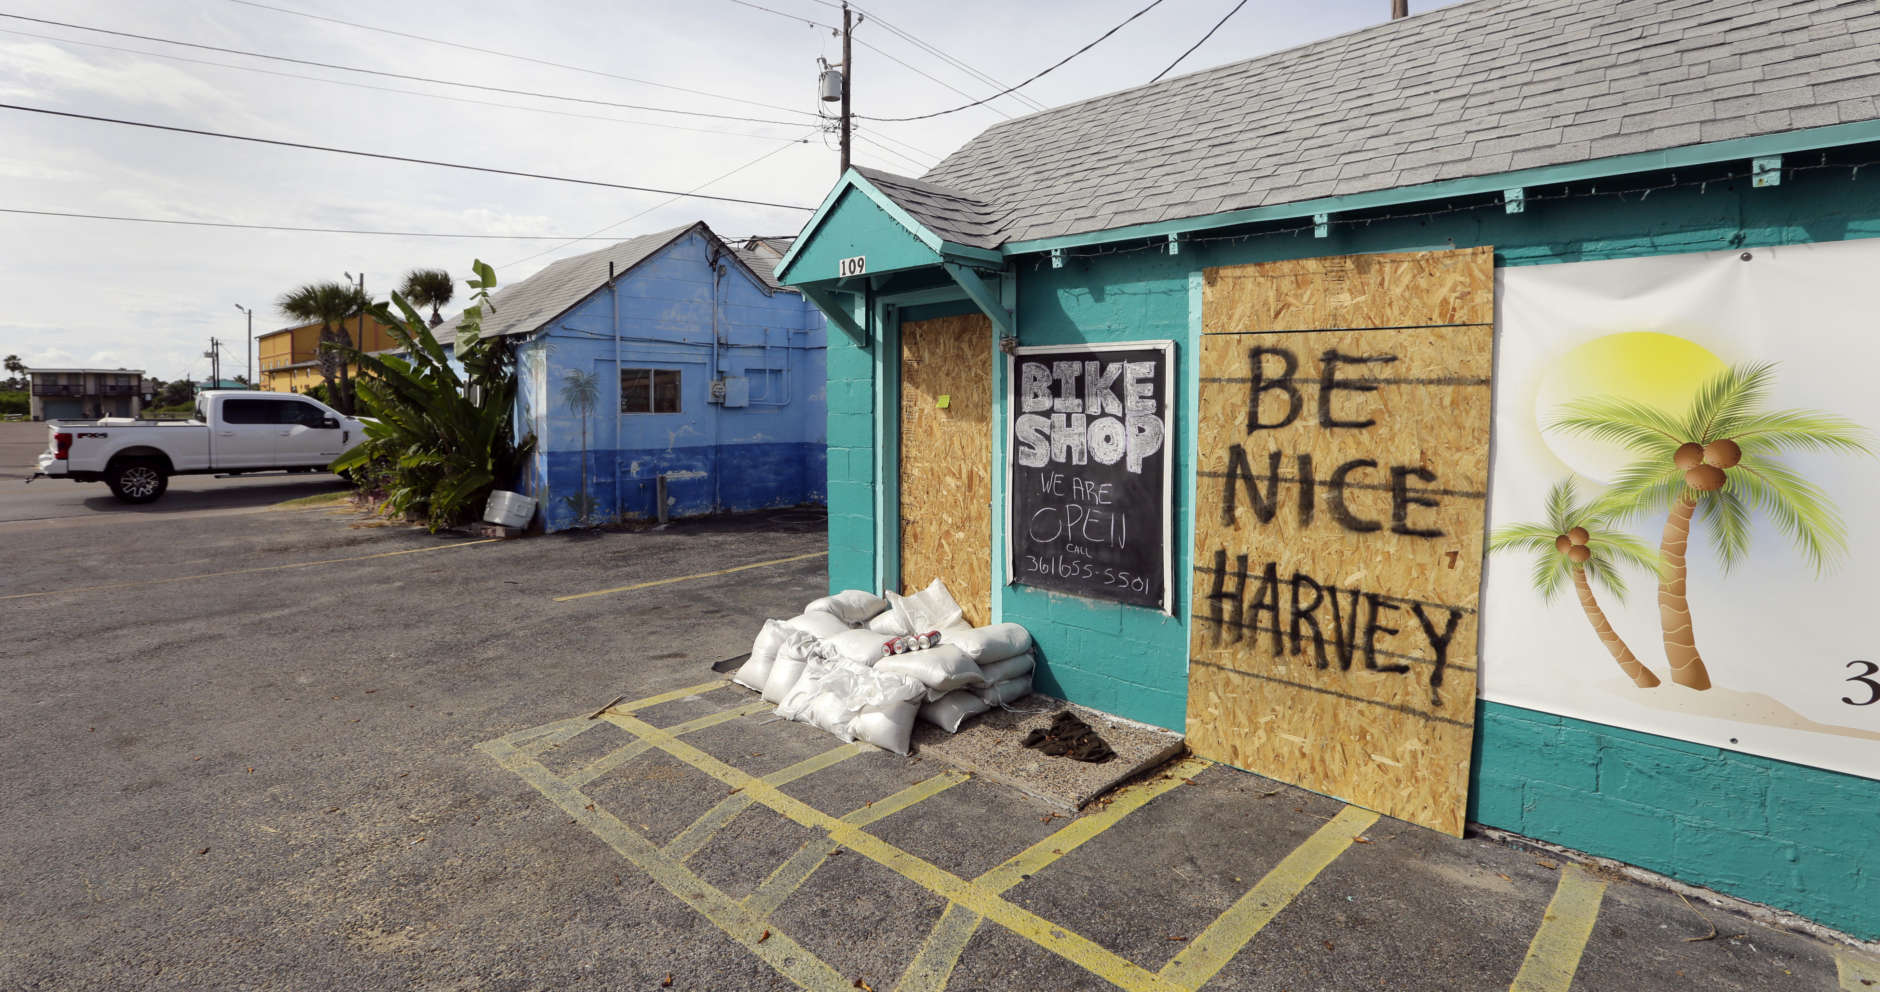 A sign reading "Be Nice Harvey" was left behind on a boarded up business, Thursday, Aug. 24, 2017, in Port Aransas, Texas. Port Aransas is under a mandatory evacuation for Hurricane Harvey. Harvey intensified into a hurricane Thursday and steered for the Texas coast. (AP Photo/Eric Gay)